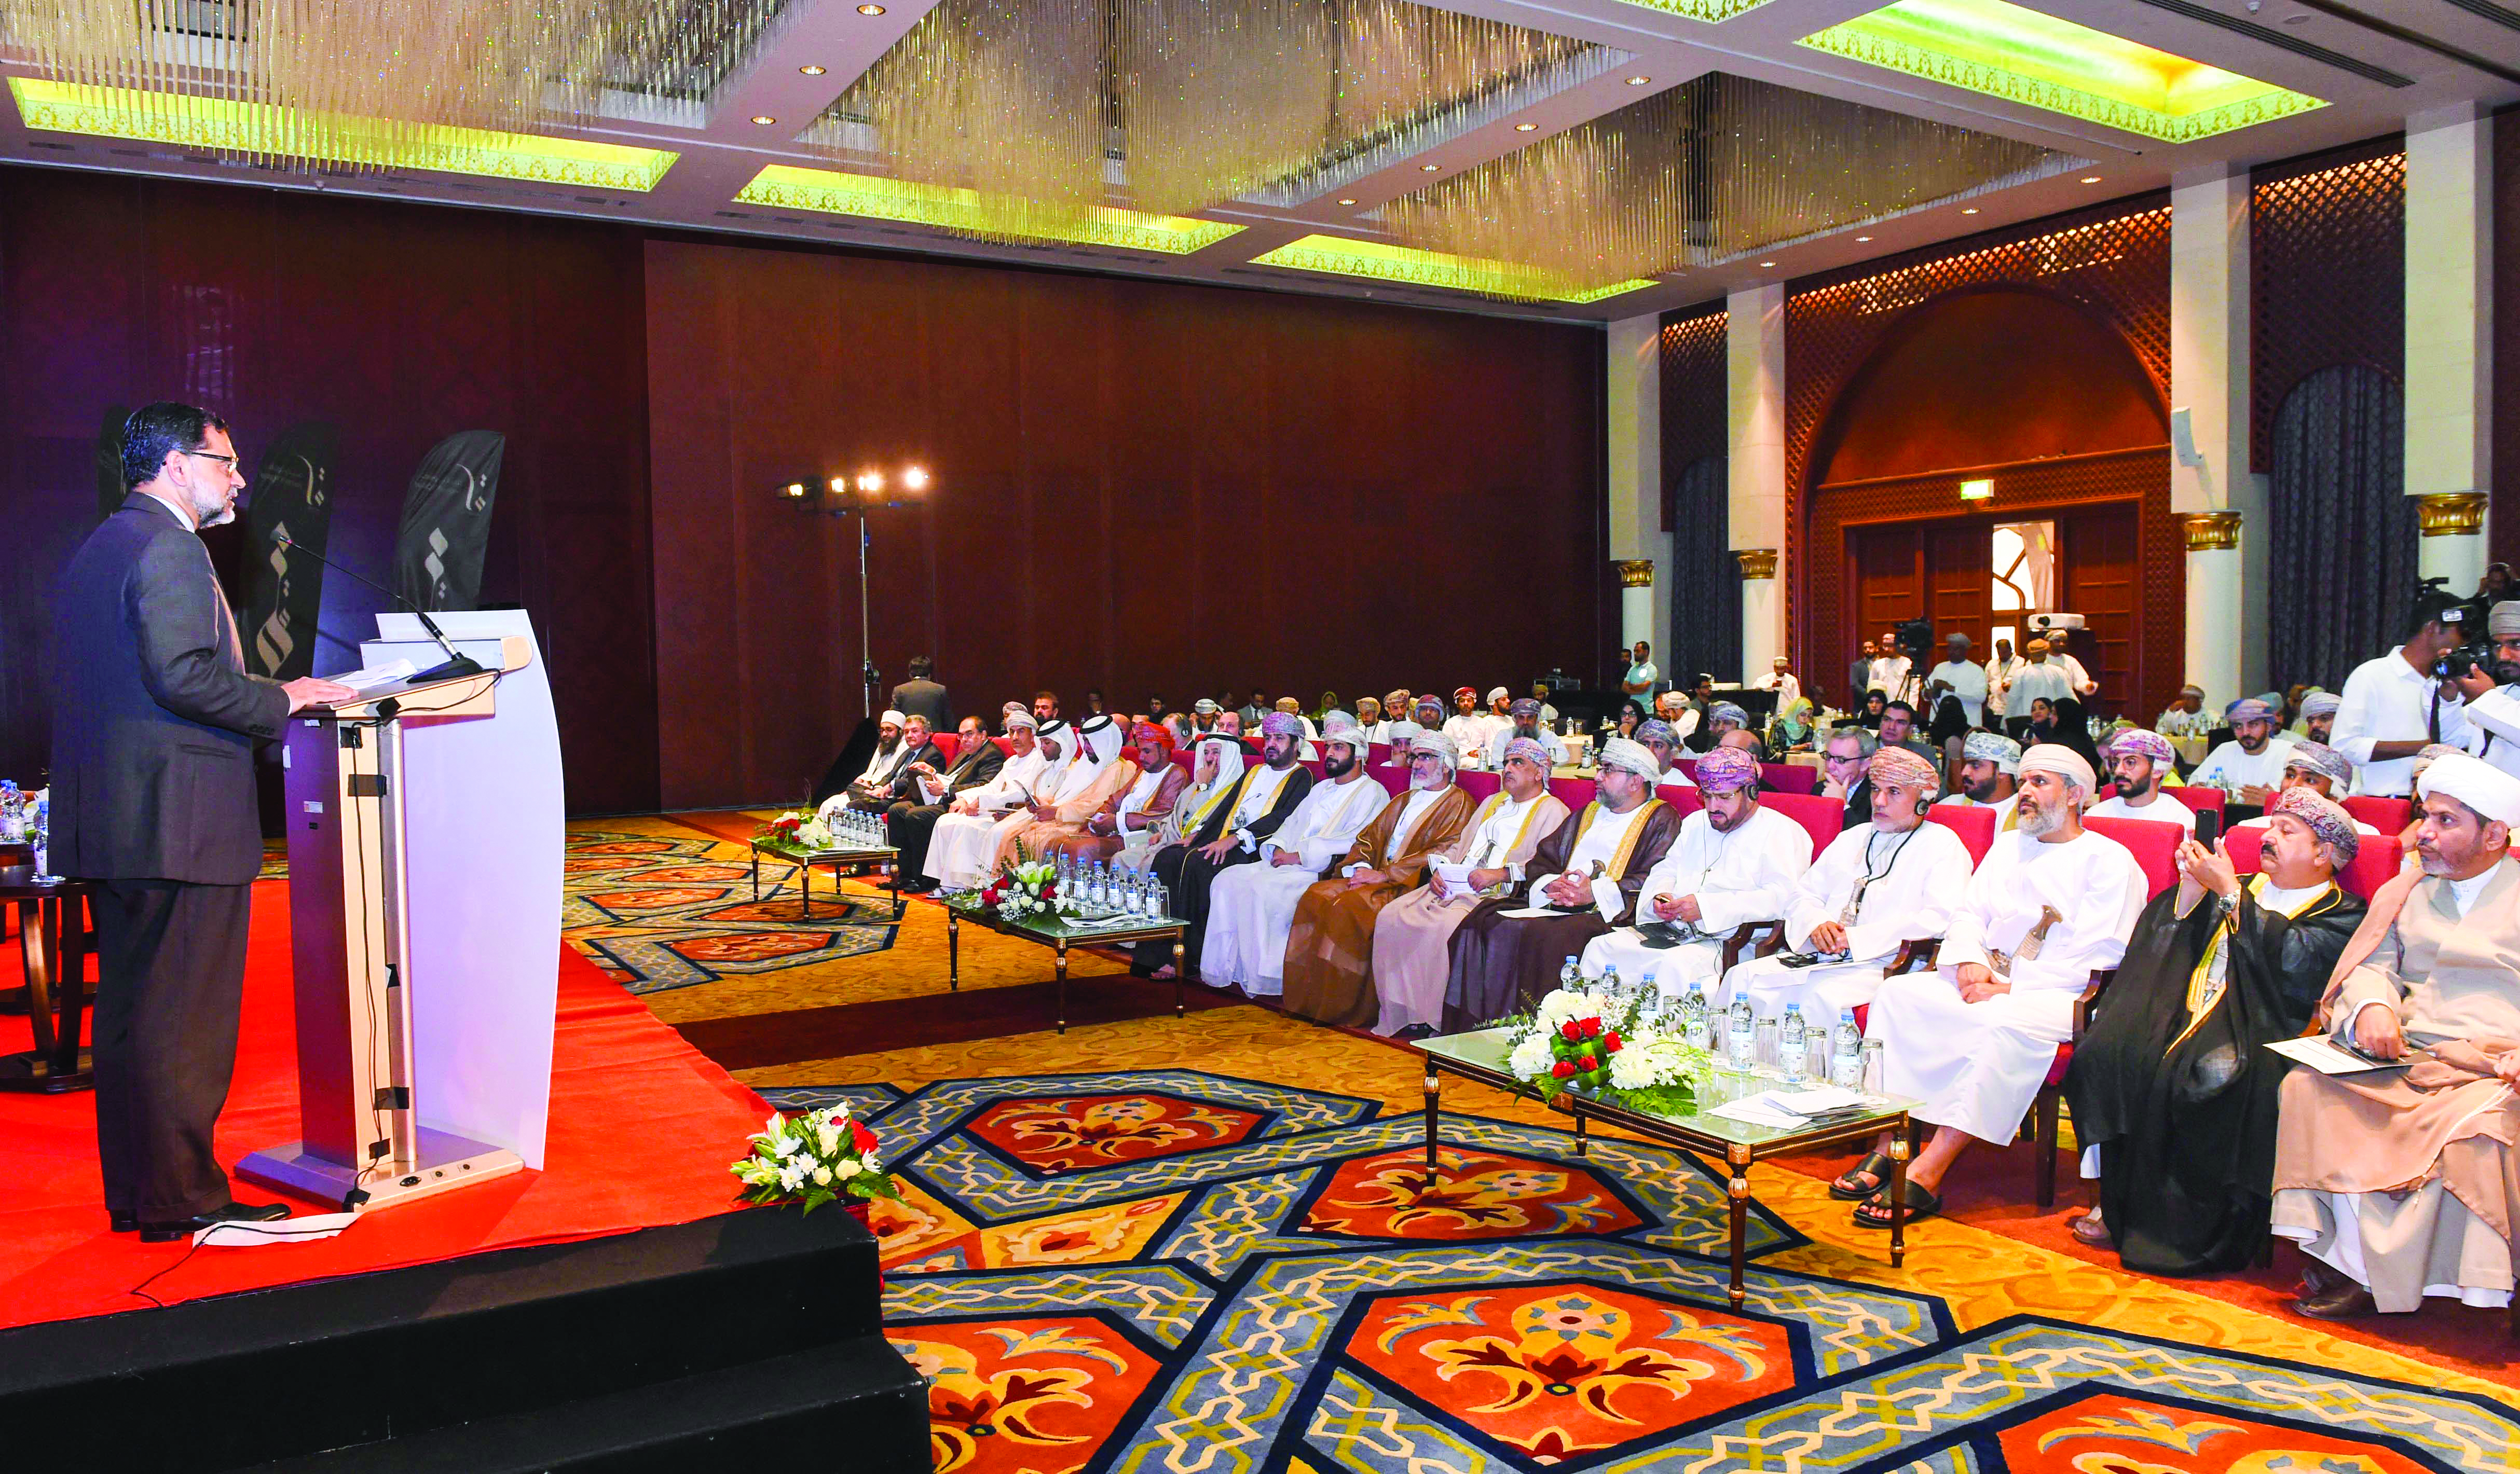 Forum in Oman focuses on funding Islamic finance institutions to boost jobs